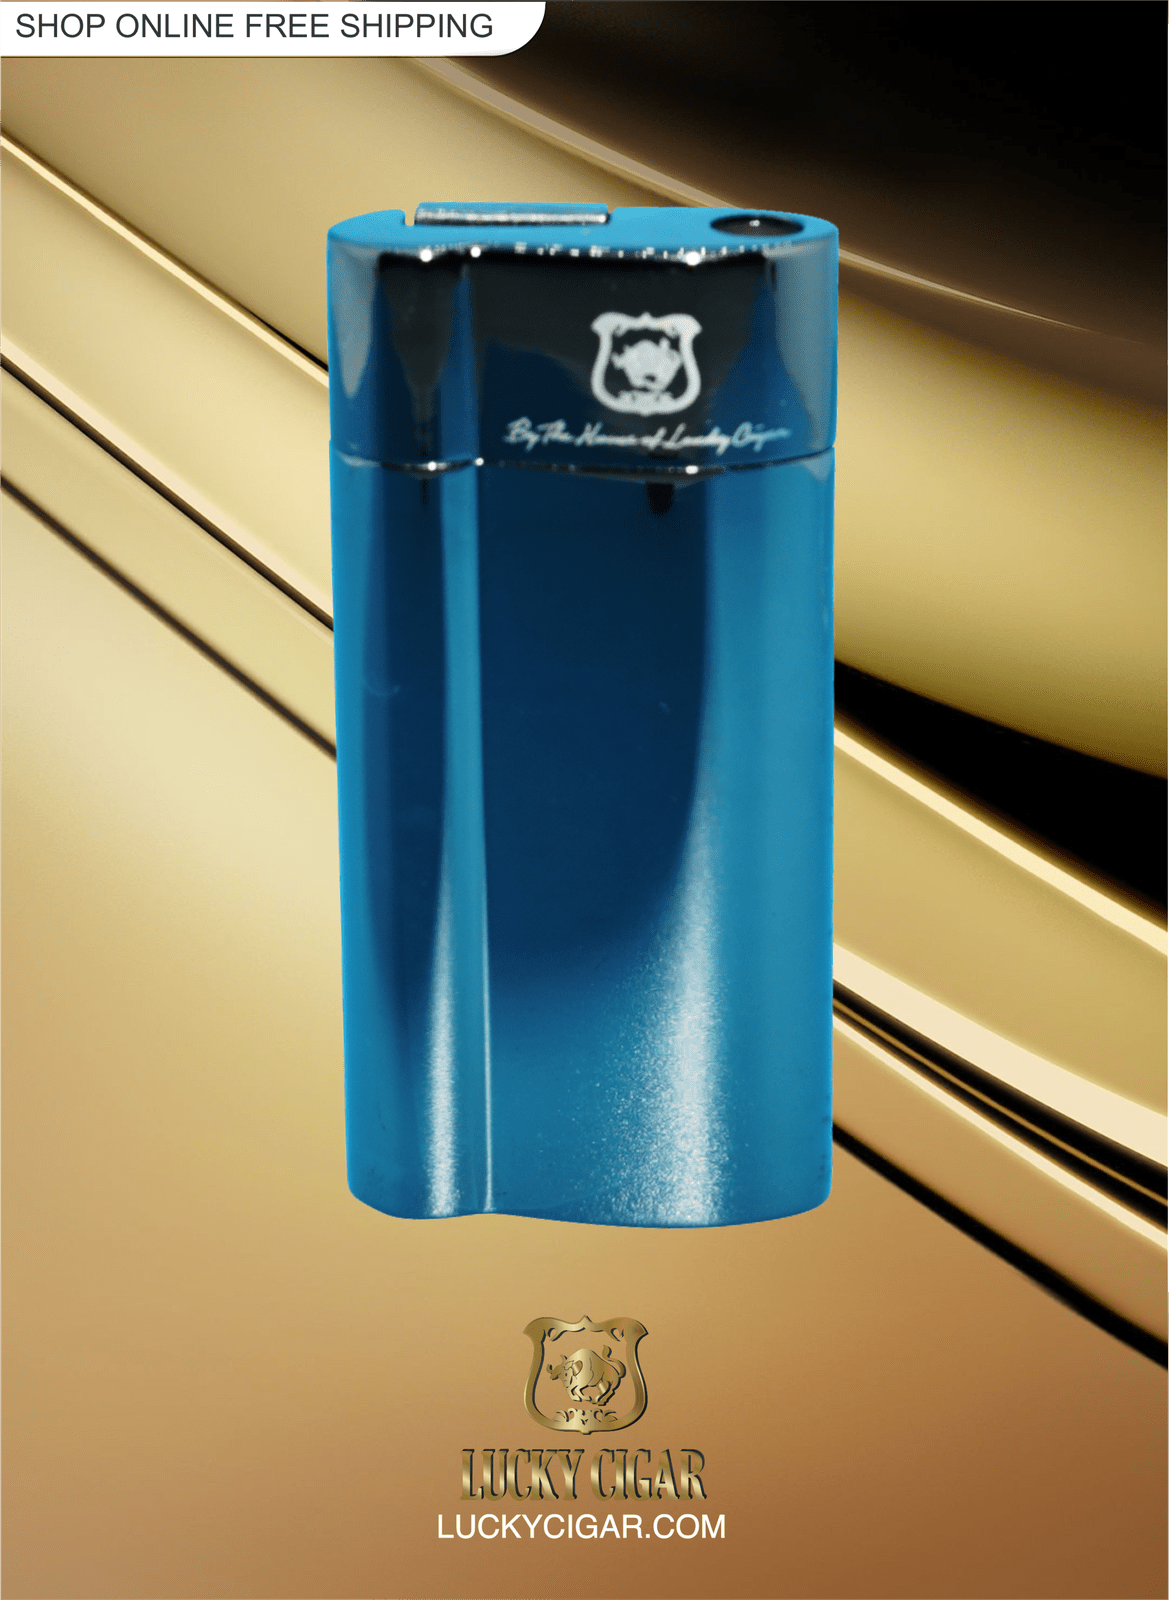 Cigar Lifestyle Accessories: Torch Lighter with in Blue Chrome